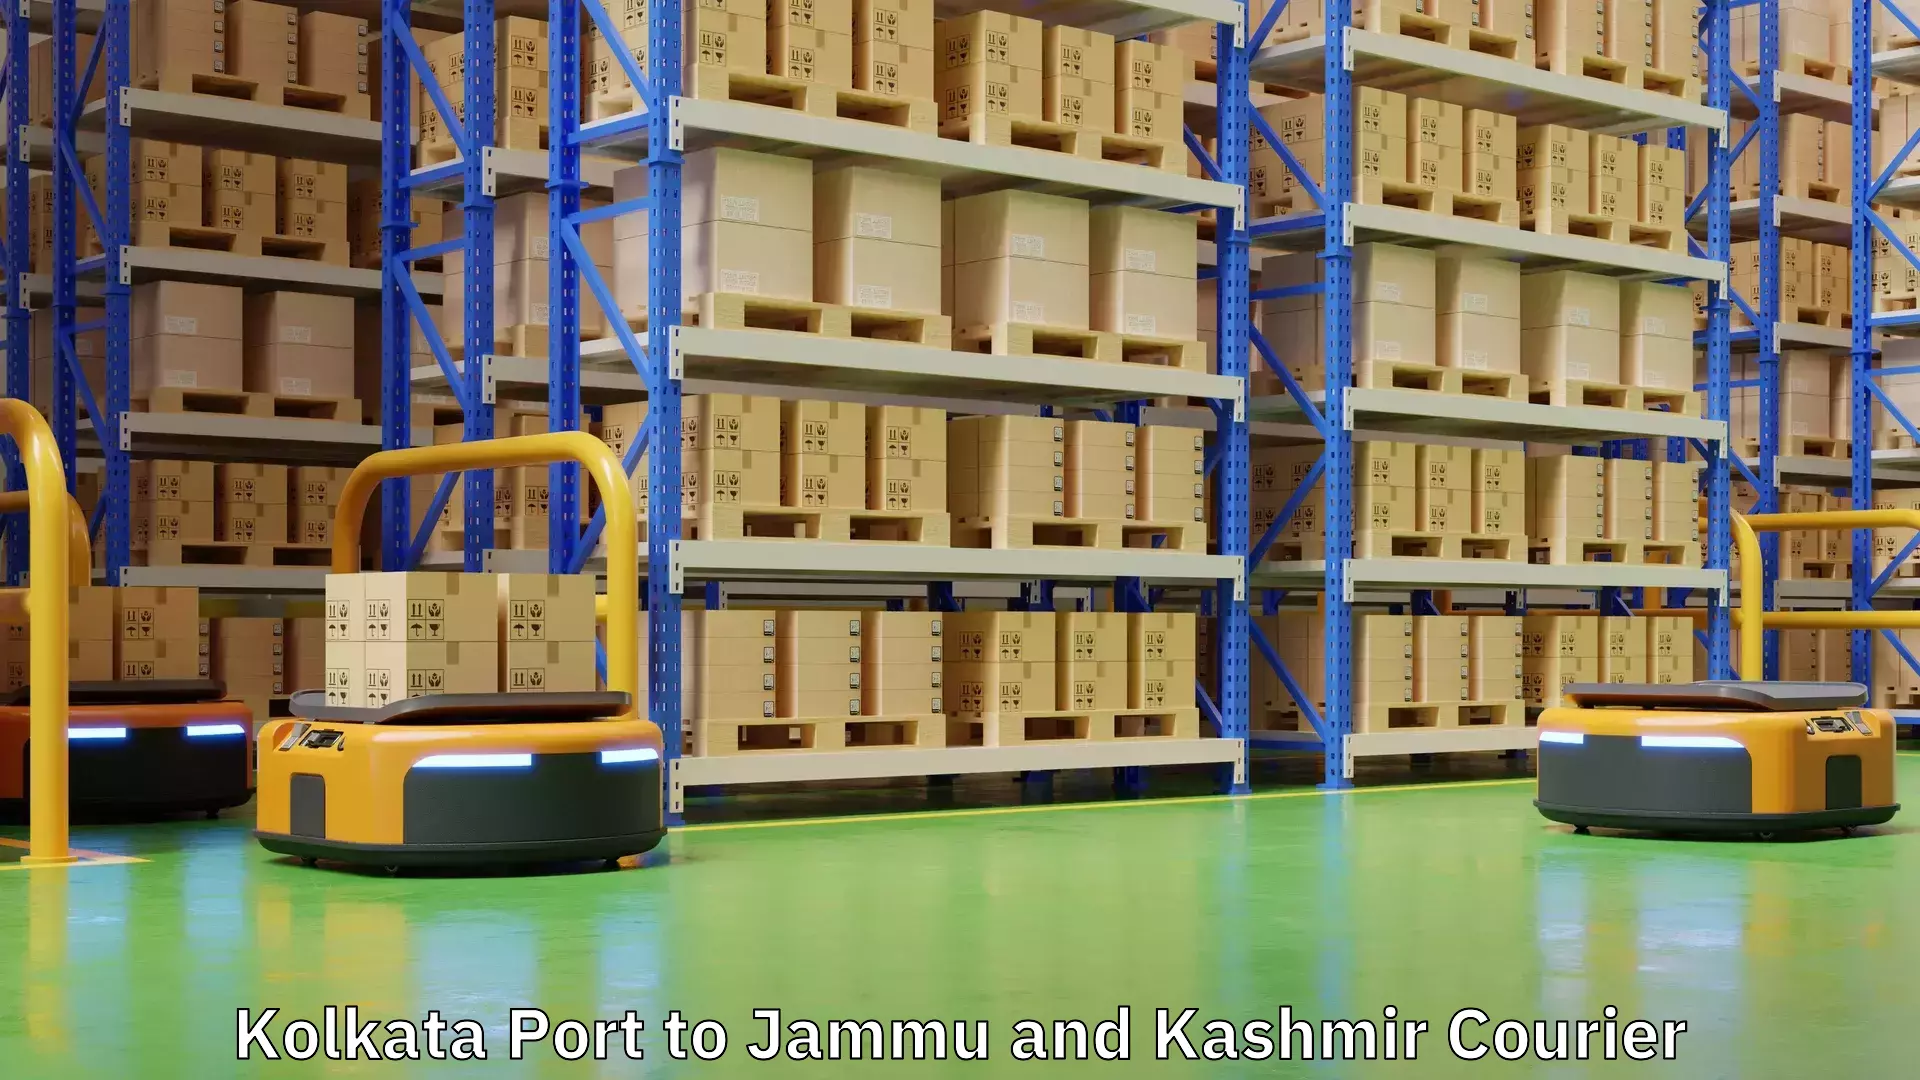 Round-the-clock parcel delivery Kolkata Port to Jammu and Kashmir